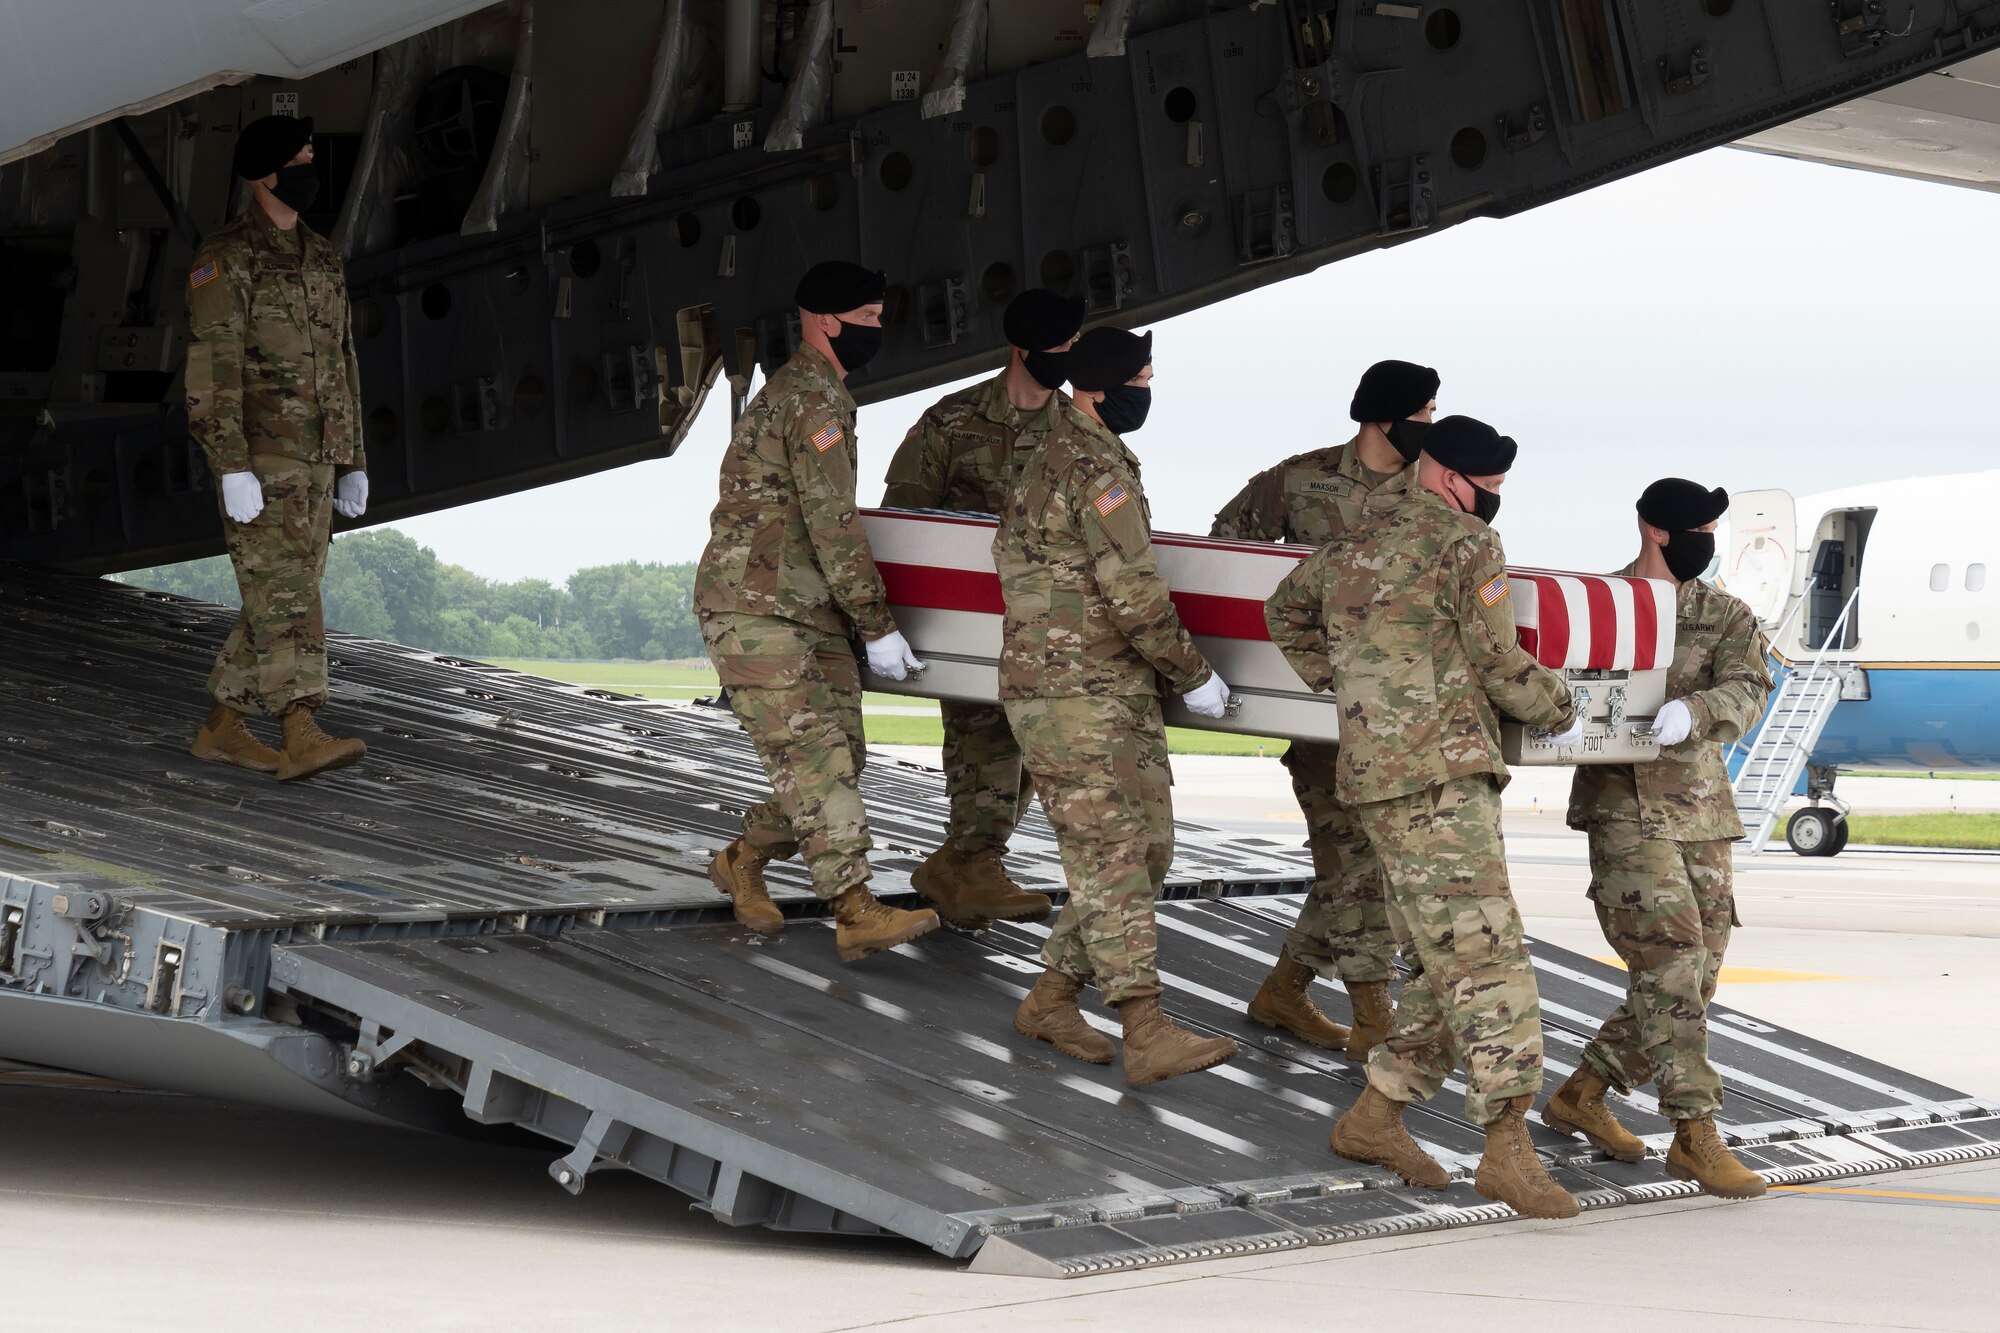 A U.S. Army carry team transfers the remains of Army Staff Sgt. Ryan C. Knauss of Corryton, Tennessee, August 29, 2021 at Dover Air Force Base, Delaware. Knauss was assigned to the 9th PSYOP Battalion, 8th PSYOP Group, Ft. Bragg, North Carolina. (U.S. Air Force photo by Jason Minto)